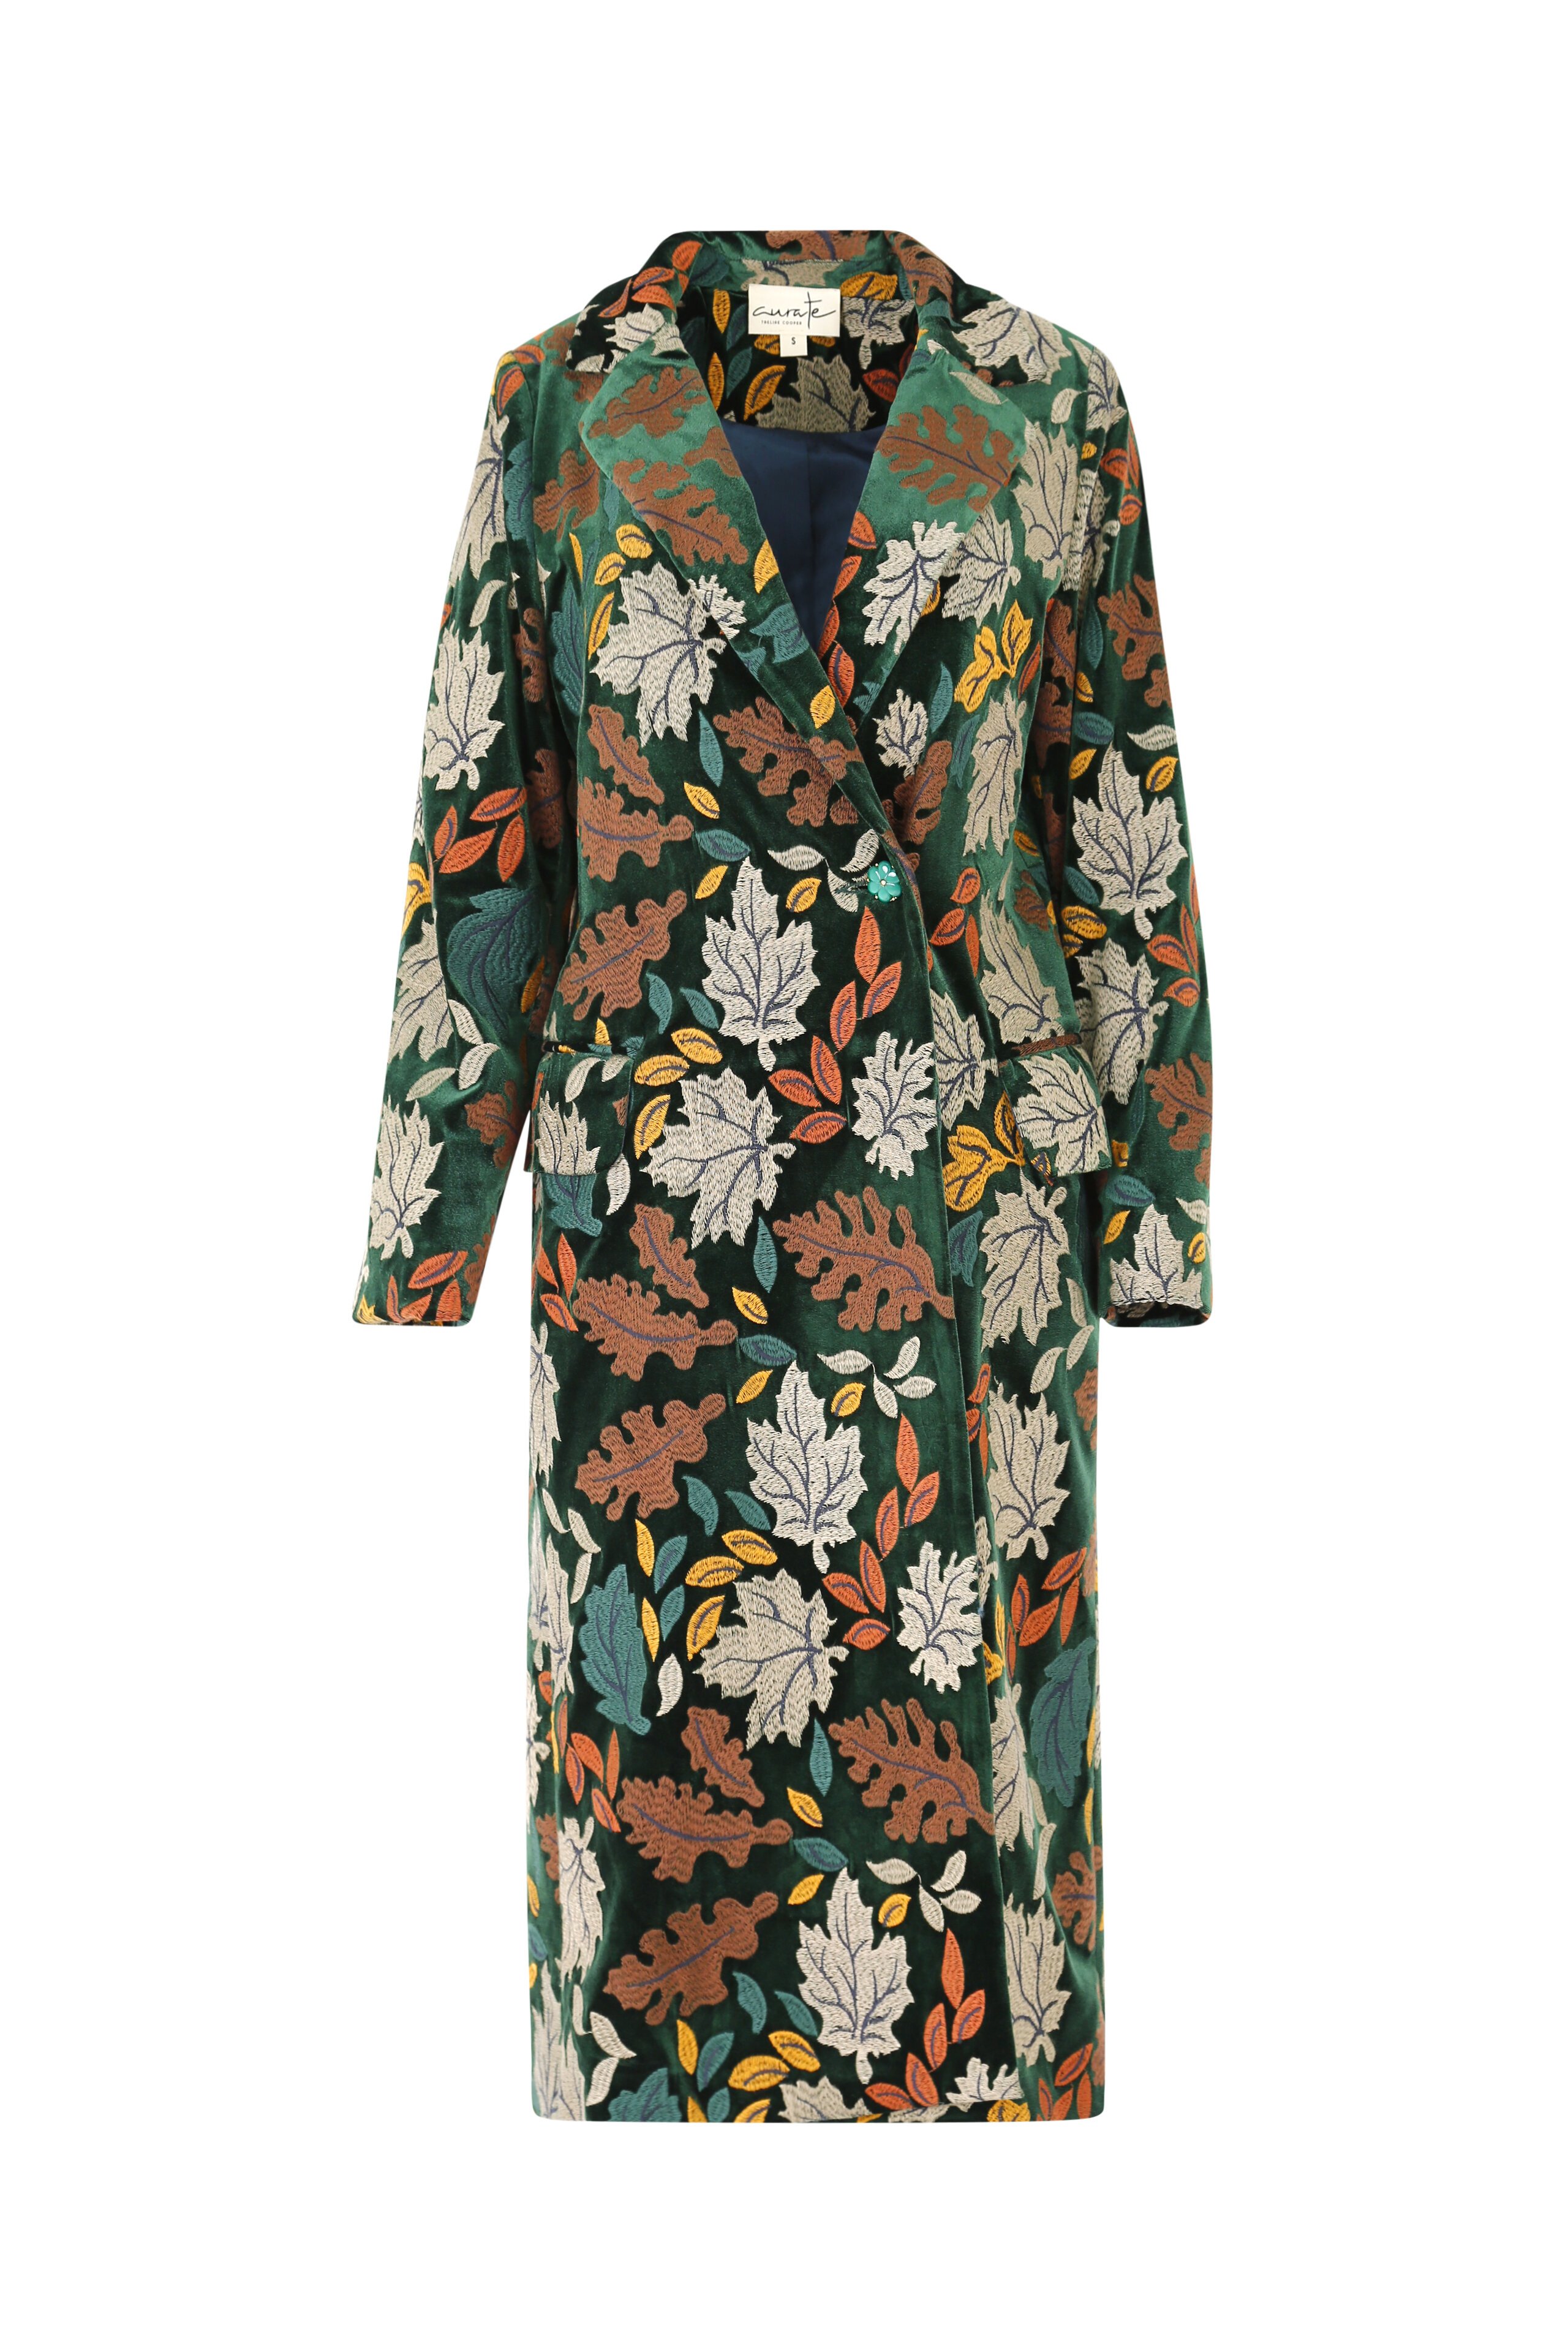 LONG NIGHT Coat - Curate : Trelise Cooper Online - THINGS I'VE GREEN ...